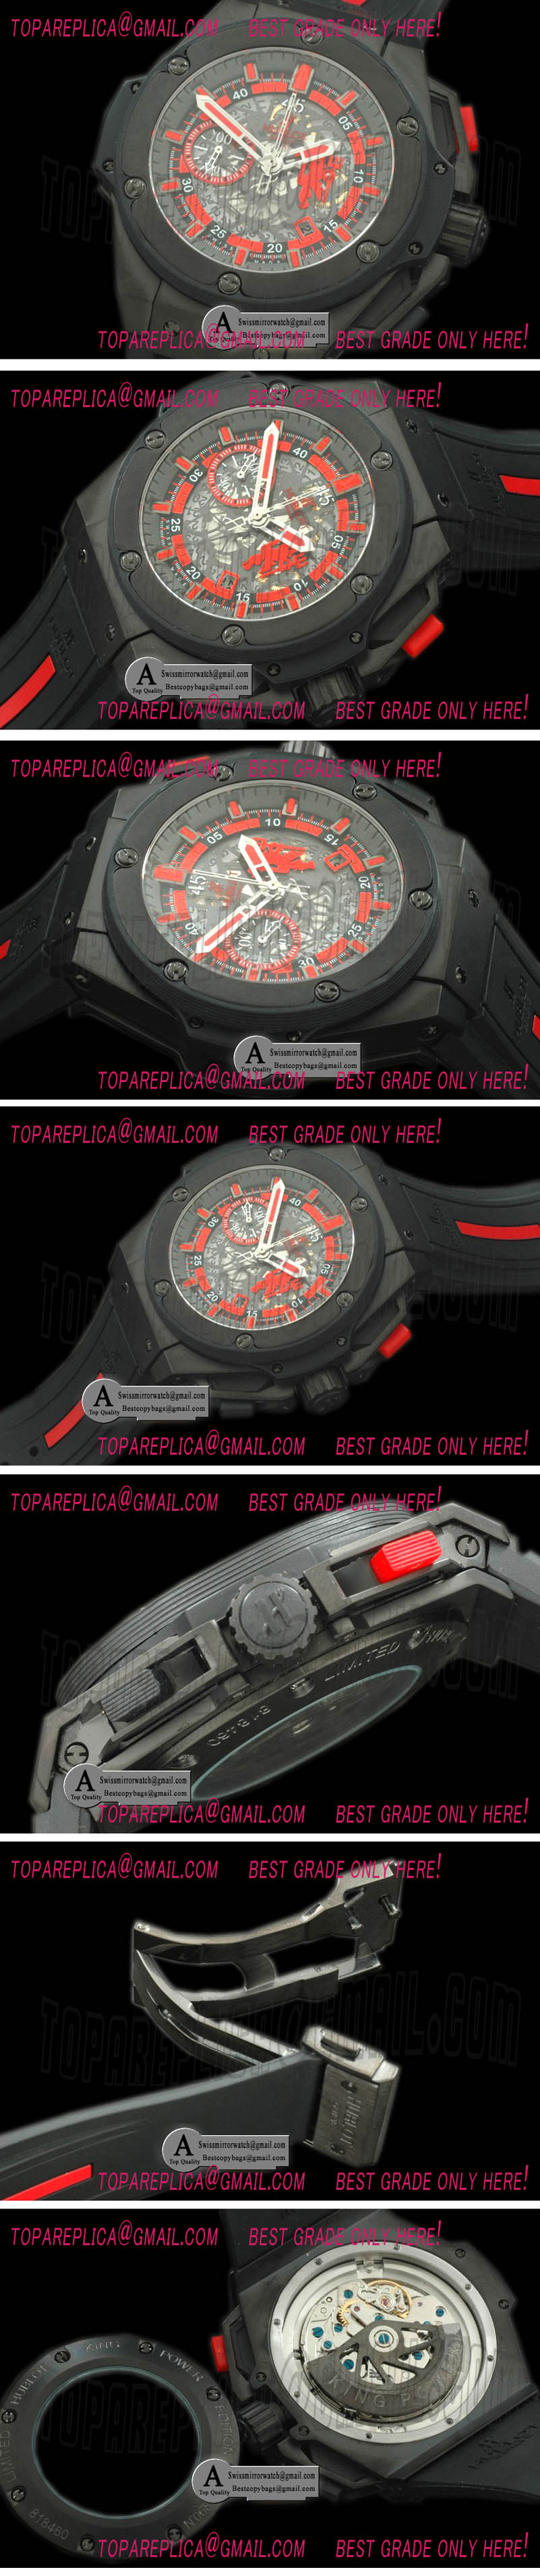 Hublot King Power Red Devil PVD/Rubber Skeleton Asian 7750 Replica Watches